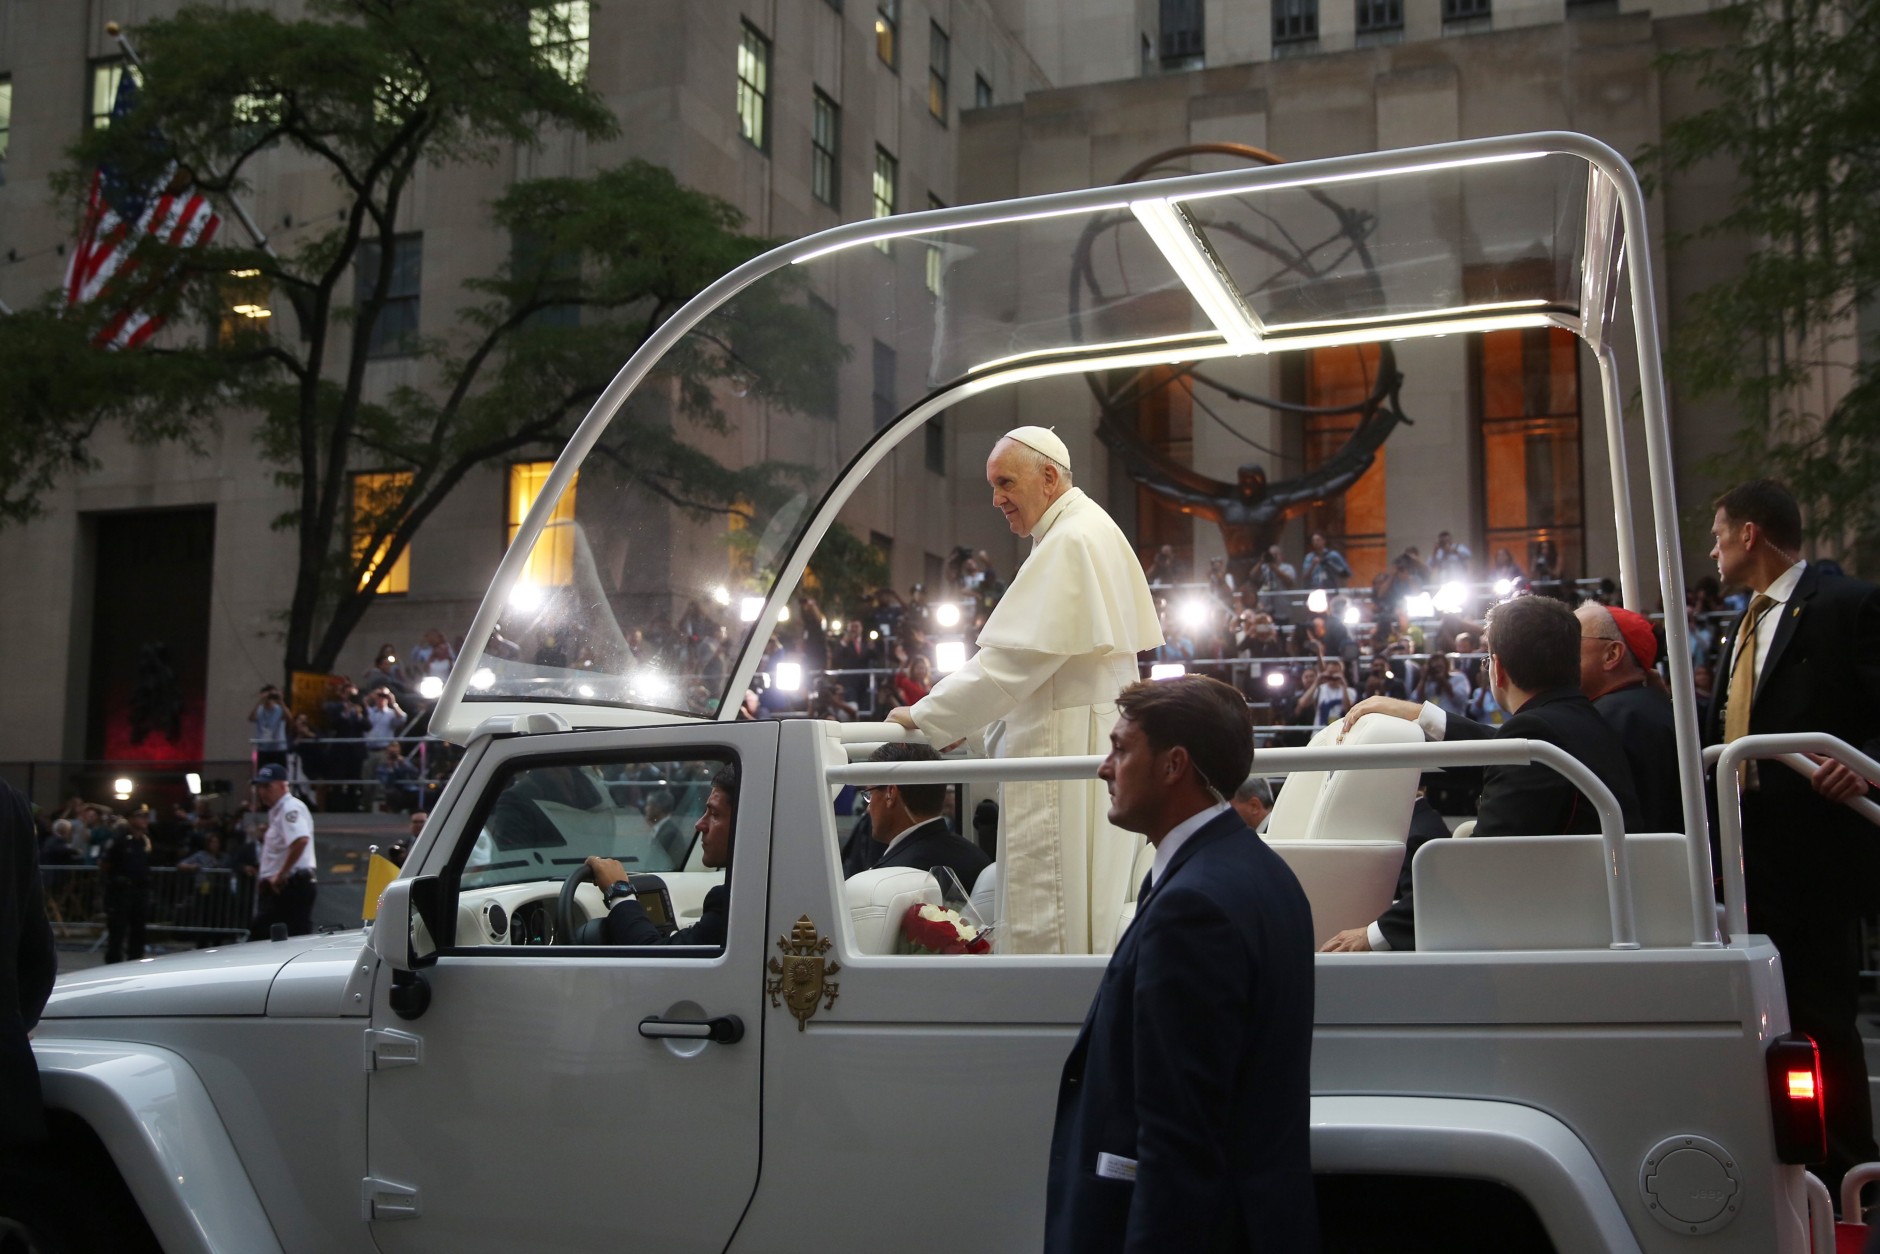 Pope Francis rides in the pope mobile on Fifth Avenue as he arrives at St. Patrick's Cathedral, Thursday, Sept. 24, 2015 in New York. (Damon Winter/The New York Times via AP, Pool)